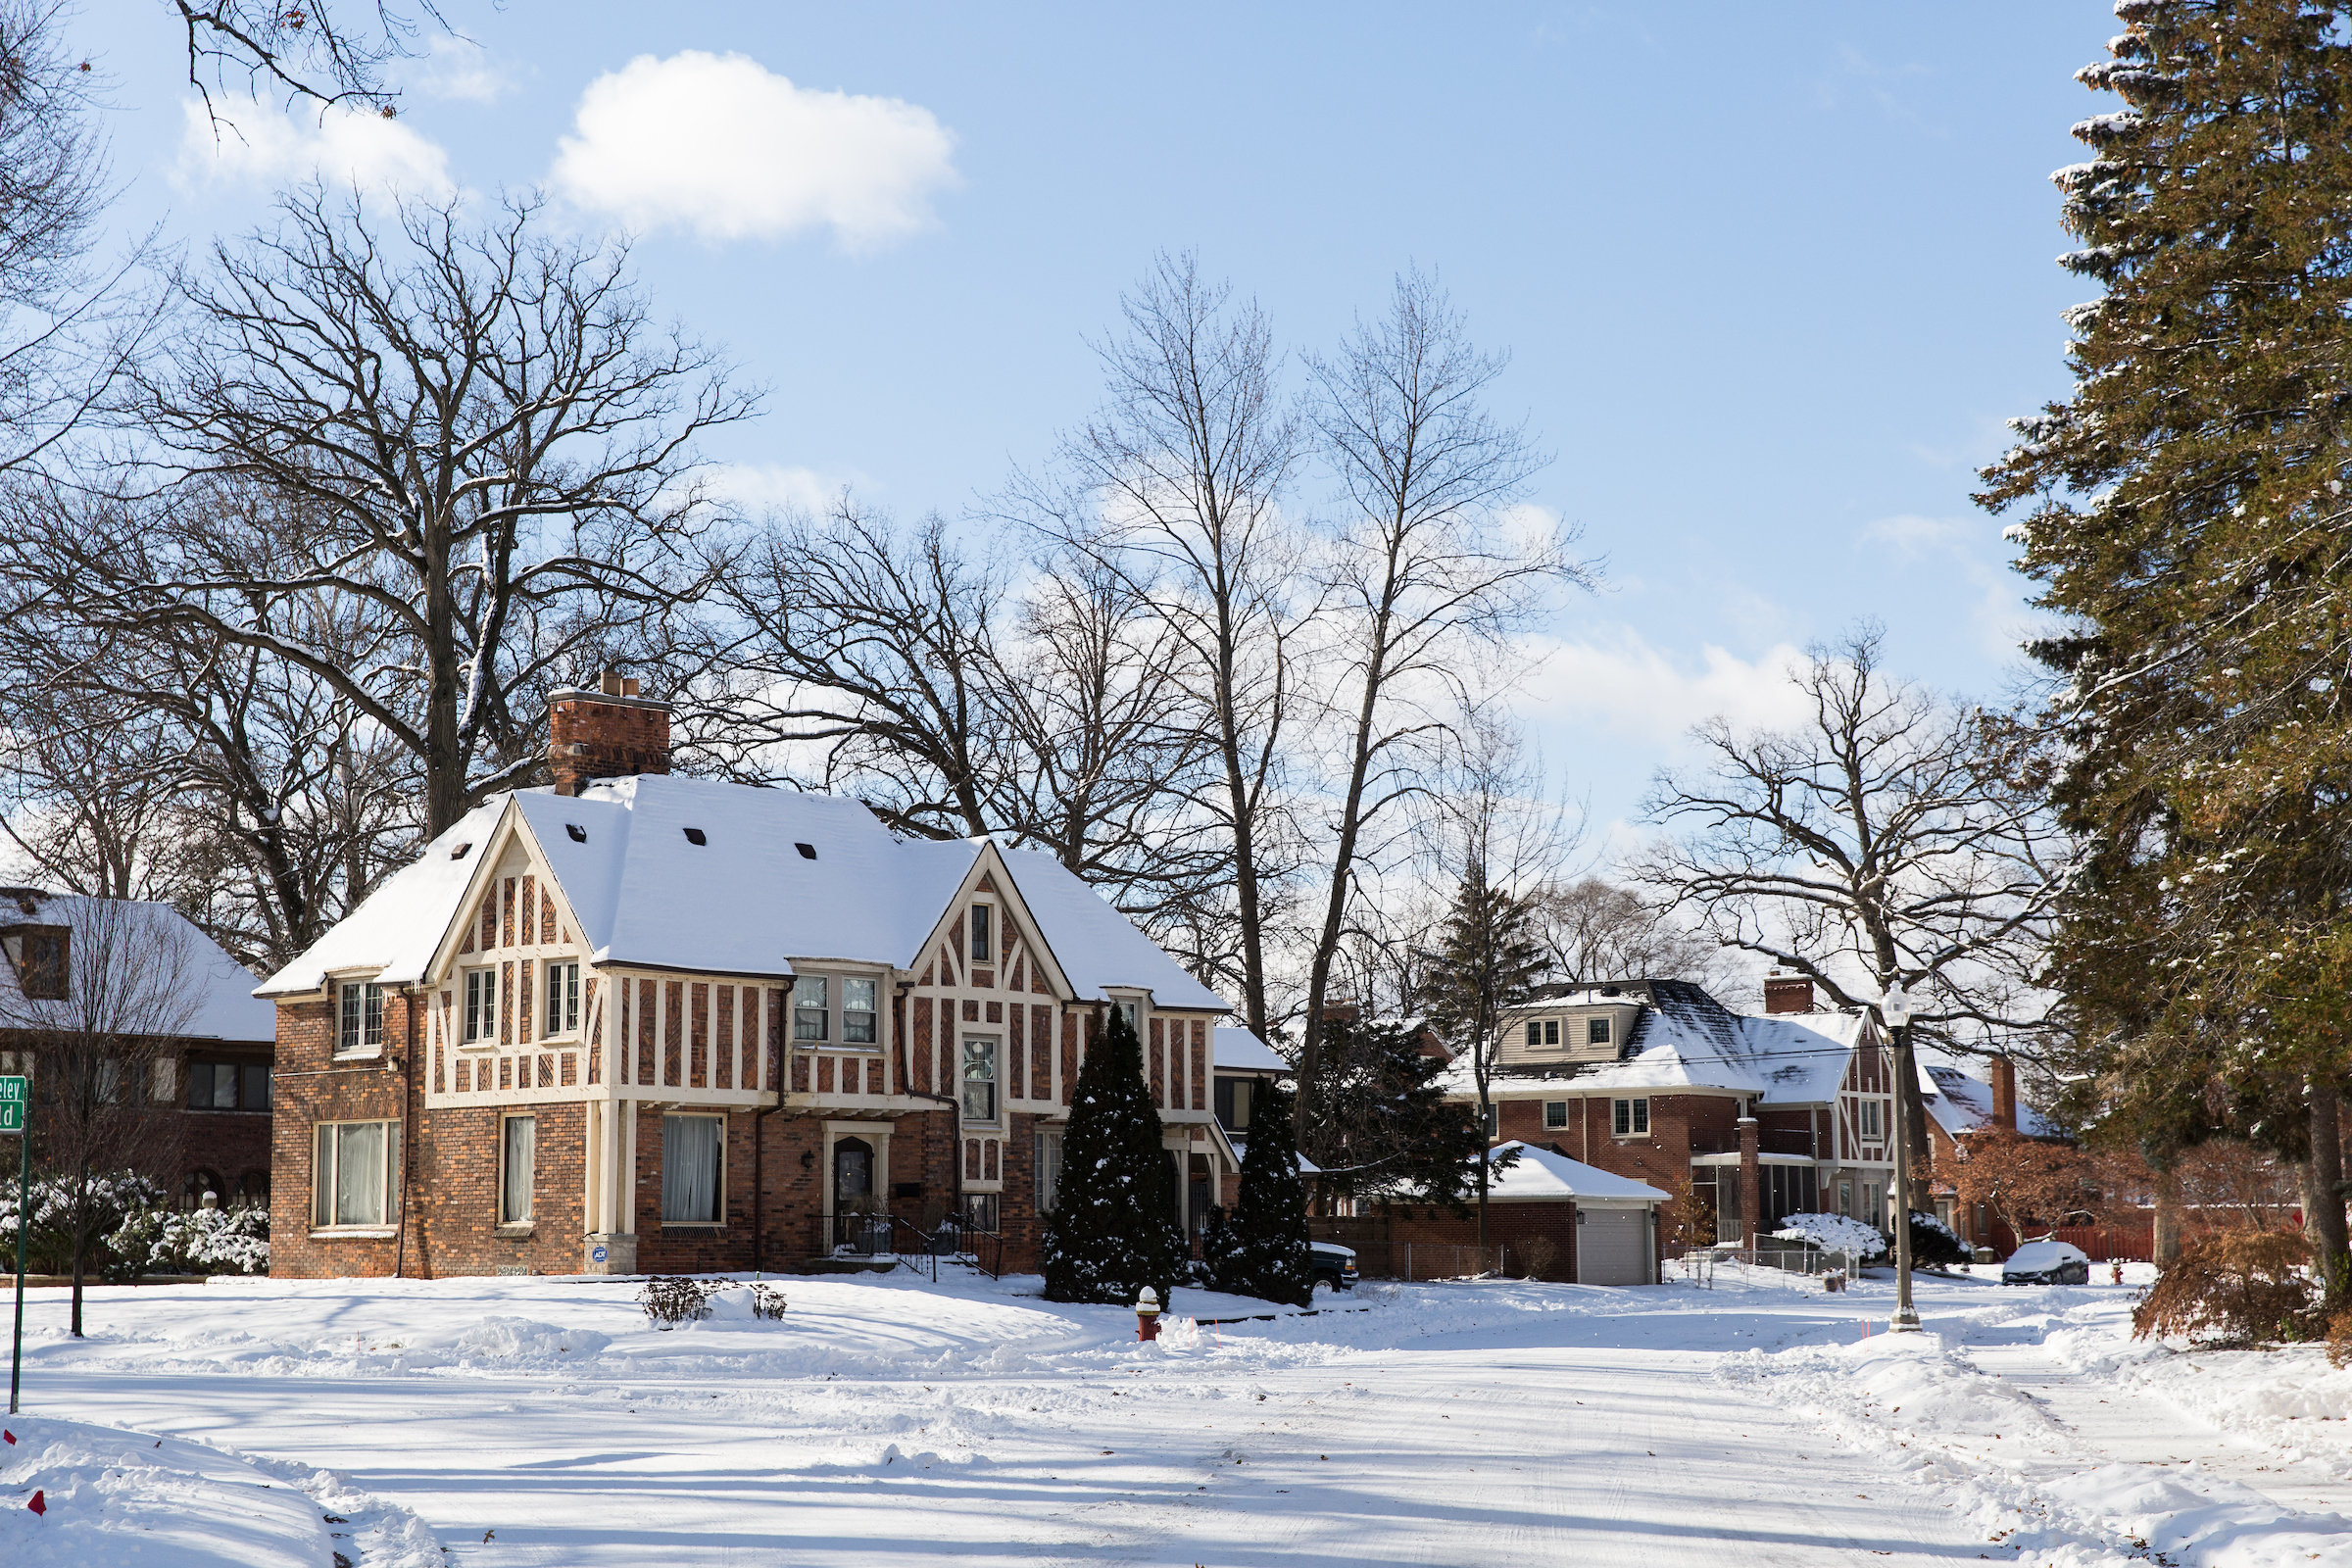 Two brown brick homes with roofs covered in snow. The road and sidewalks in the neighborhood are also covered in snow.